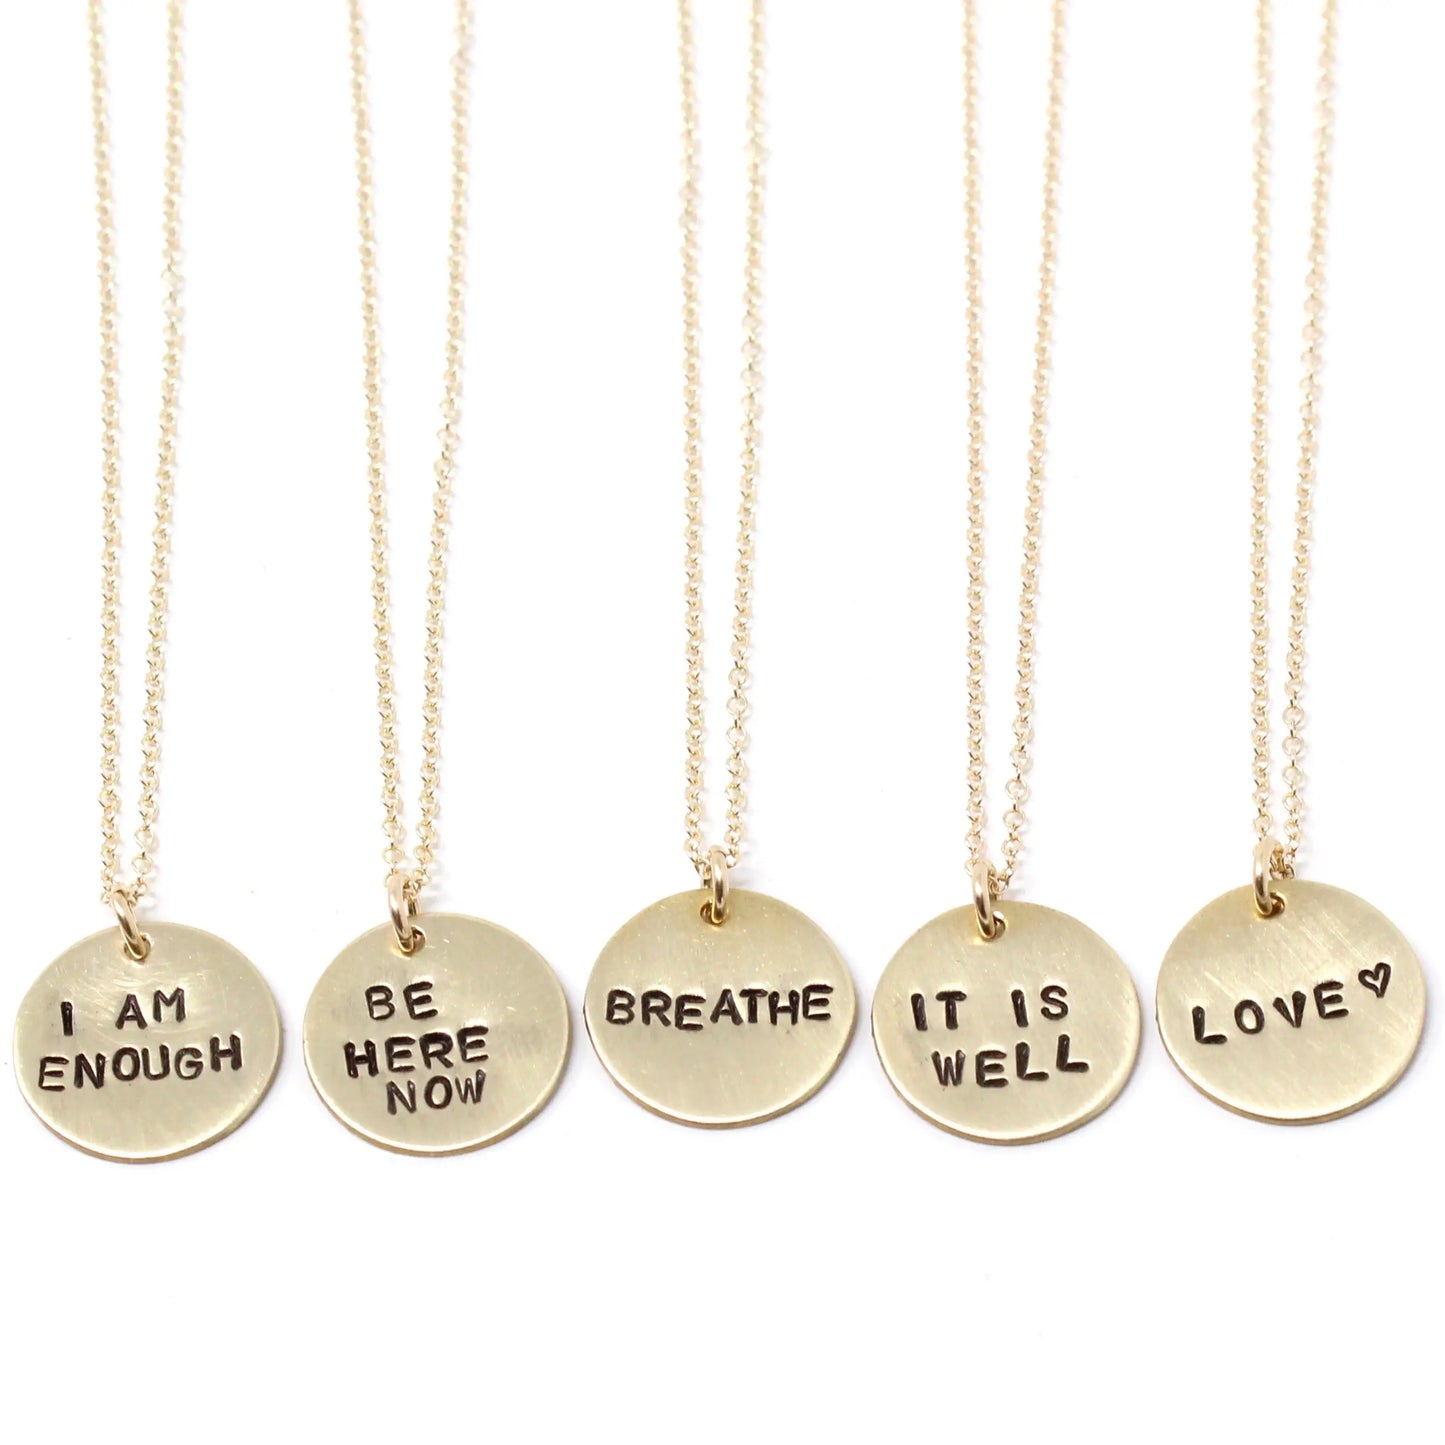 Stamped phrase necklace